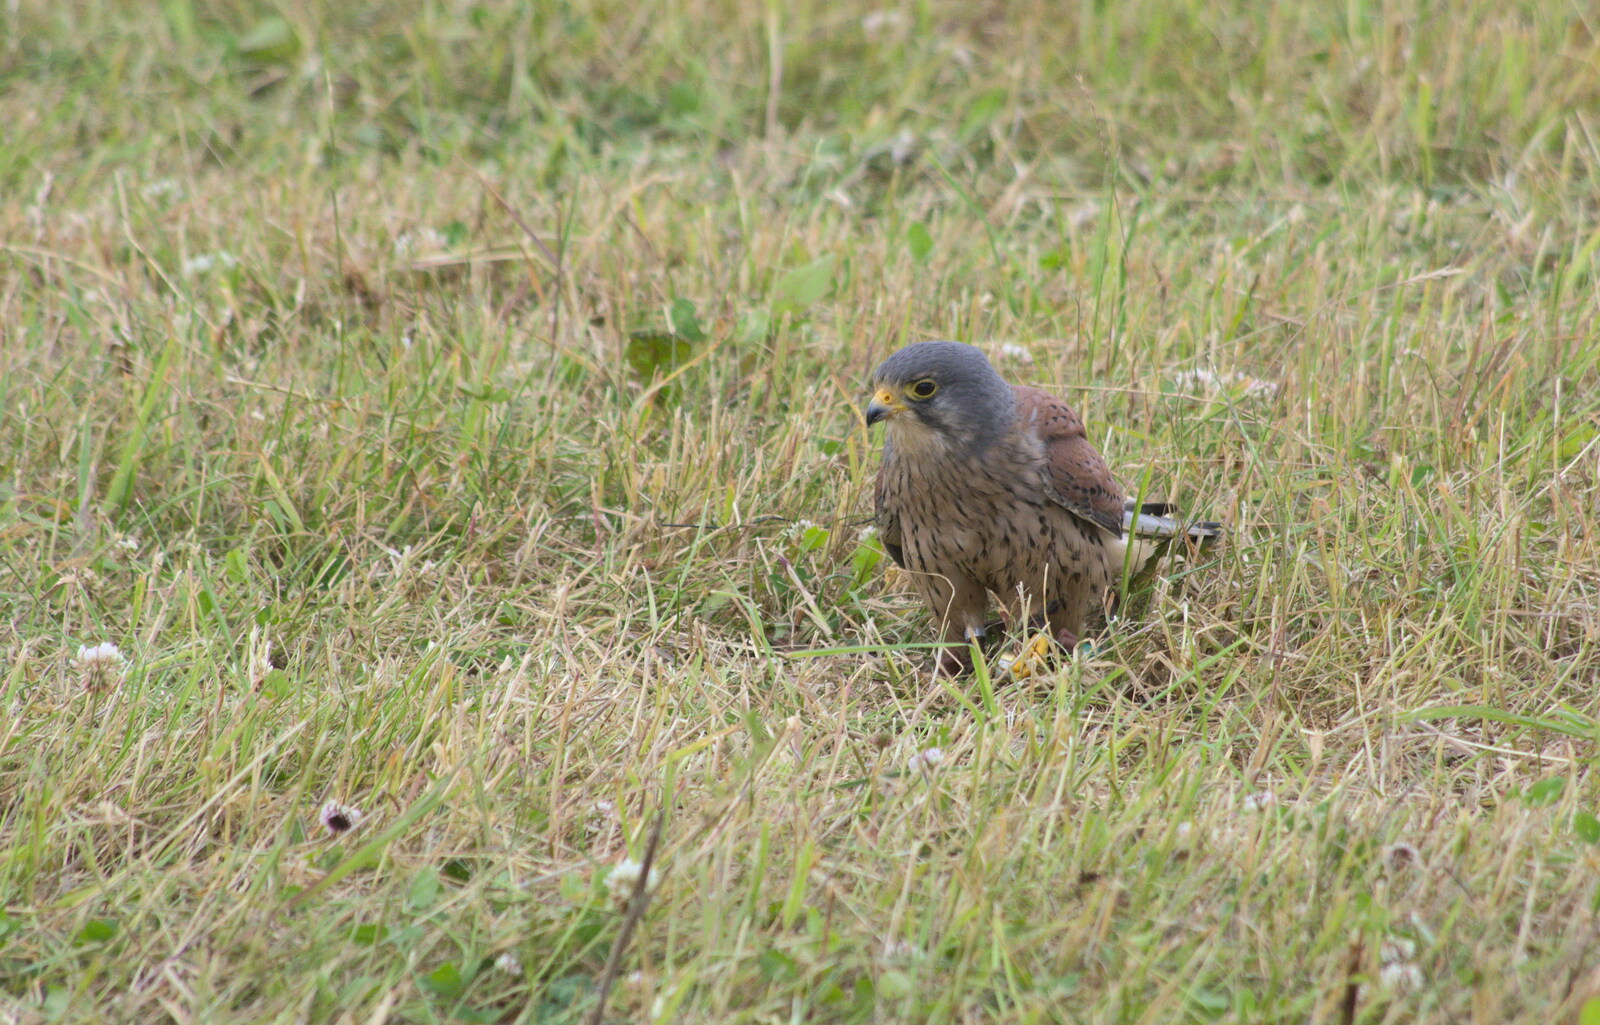 A kestrel called Blackberry from A Vintage Tractorey Sort of Day, Palgrave, Suffolk - 21st June 2015